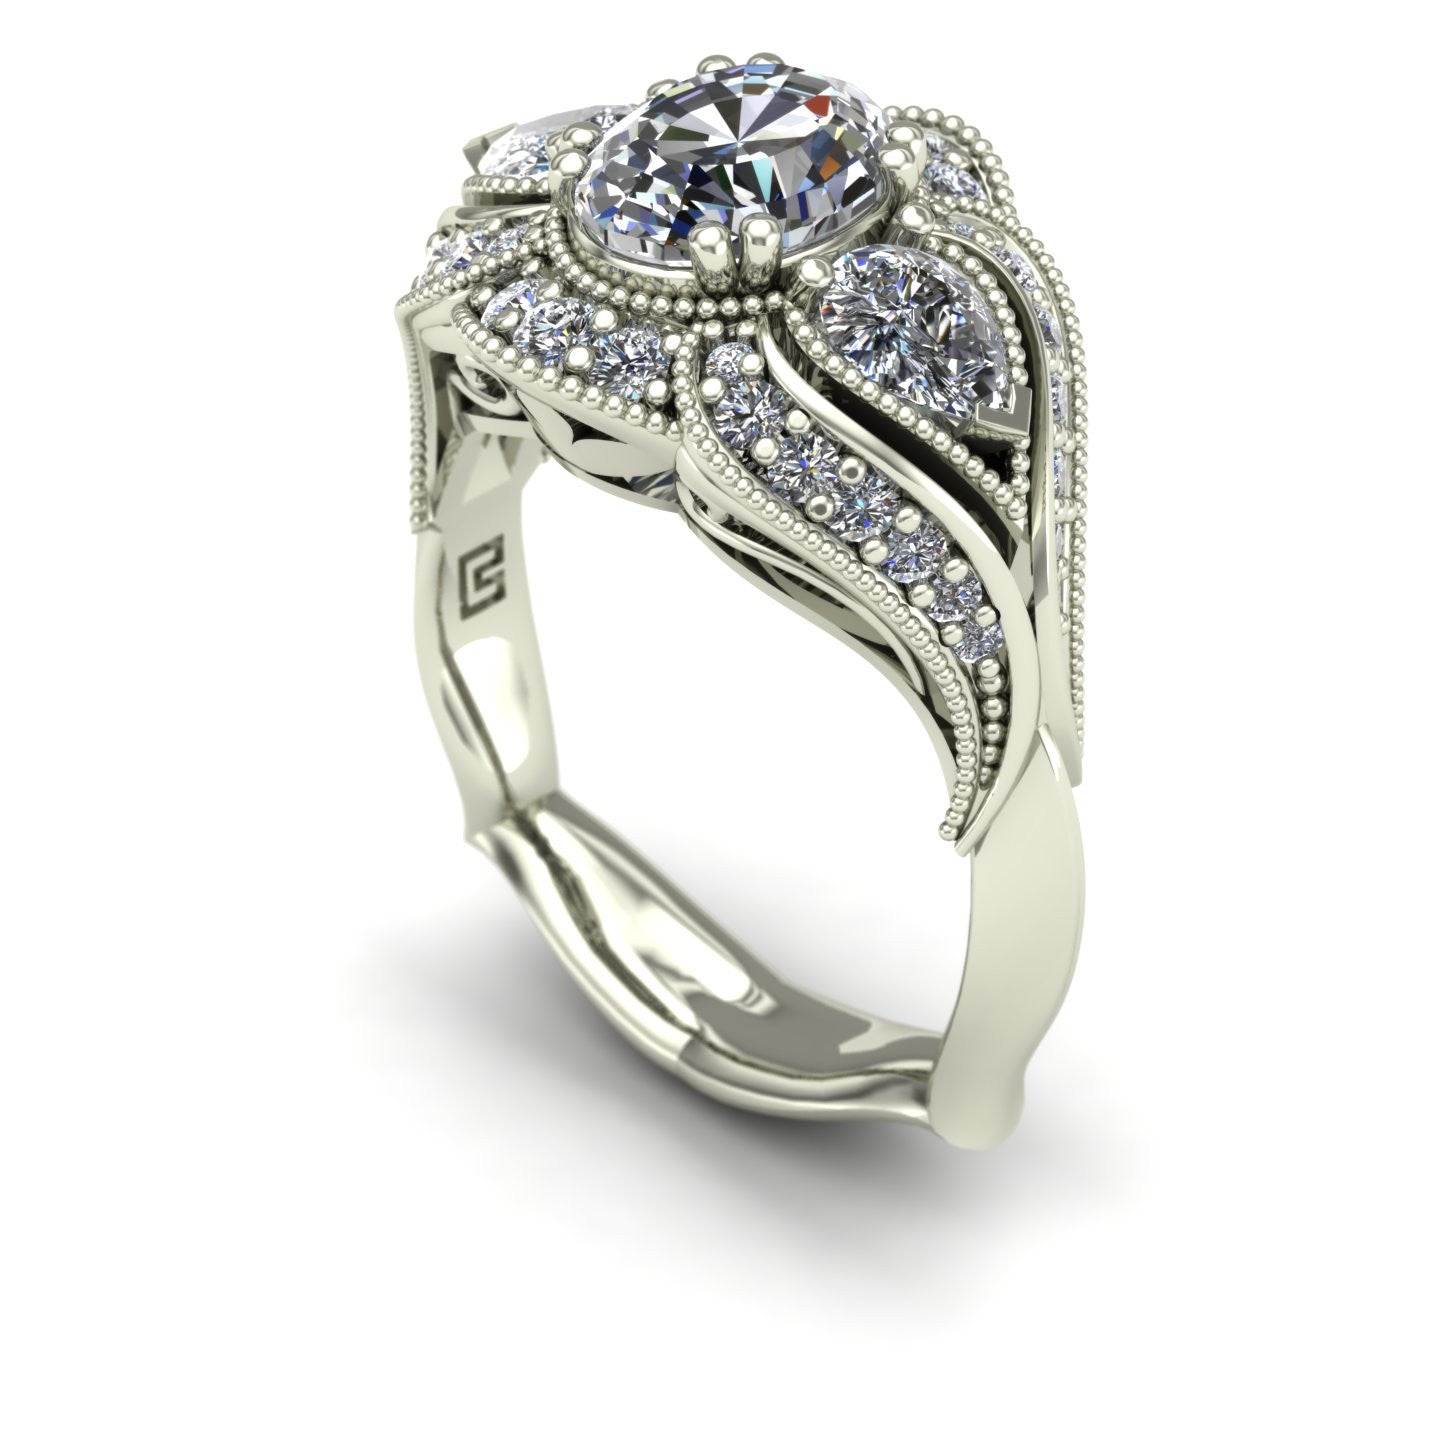 Oval and pear diamond engagement ring in 18k white gold - Charles Babb Designs